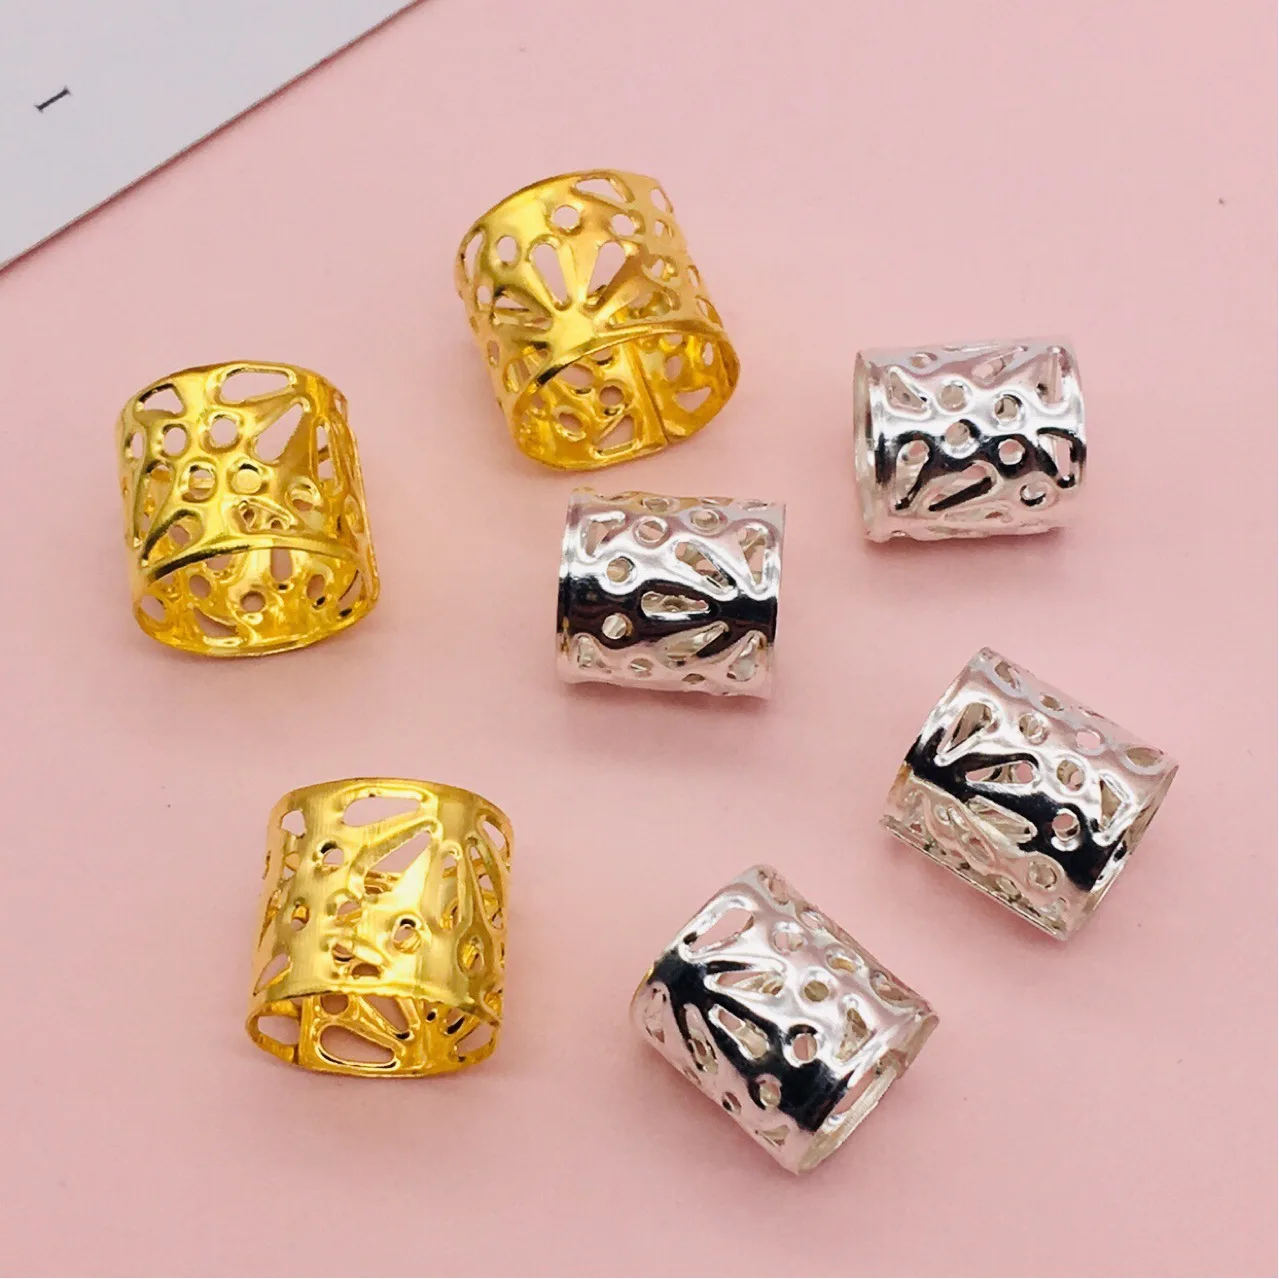 

Hair bead woven iron dirty buckles extension ring hair braid cuff Gold and Silver Dreadlocks Extension Women decorative Jewelry, As shown